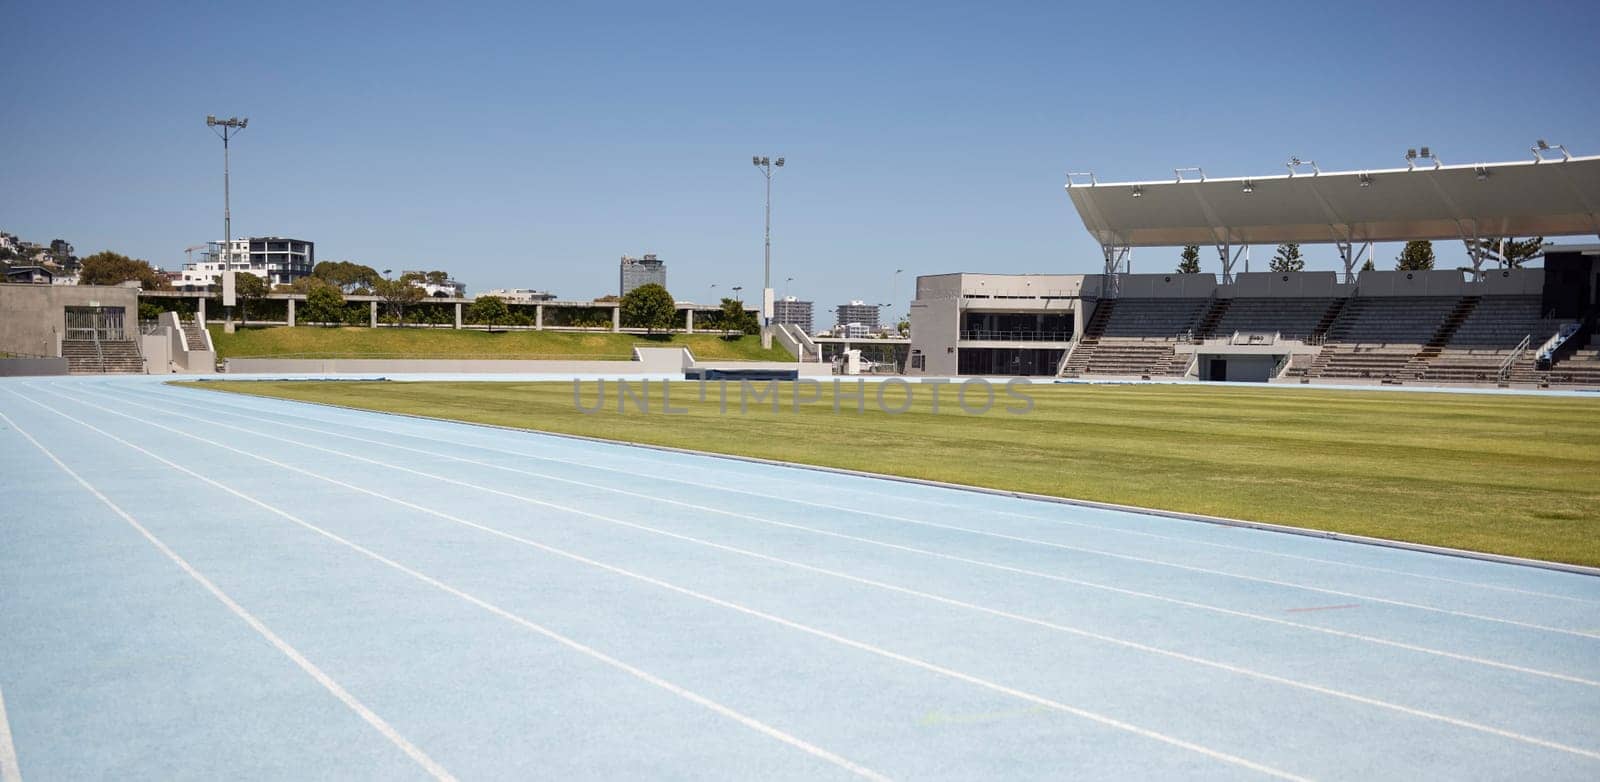 Race track, athletic and empty outdoor sports stadium for marathon, competition or olympics. Sport, no people and field at outside arena for training, exercise or workout for professional athletes. by YuriArcurs